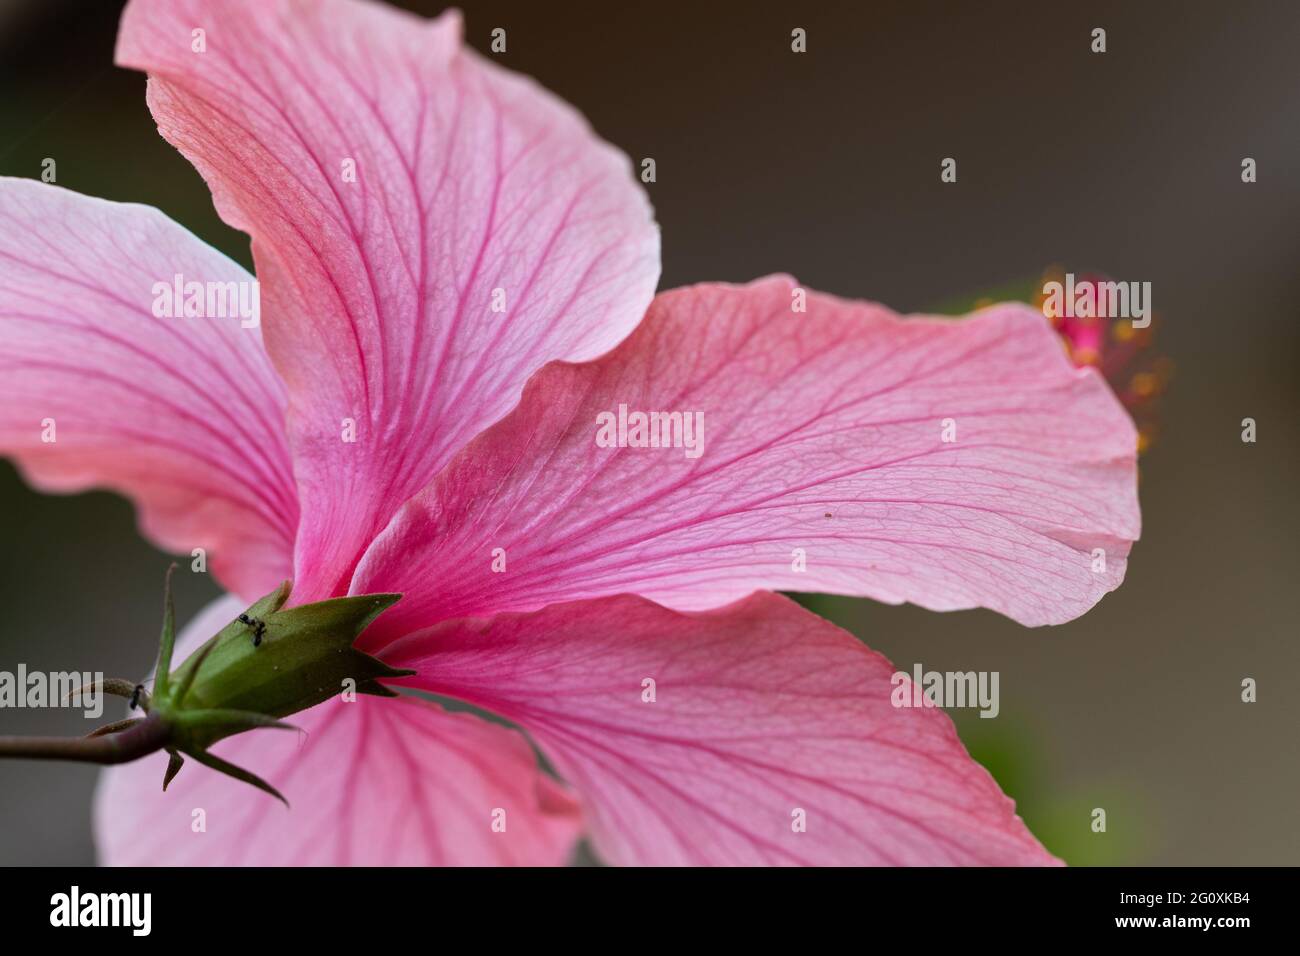 The pink flower of a hibiscus Stock Photo